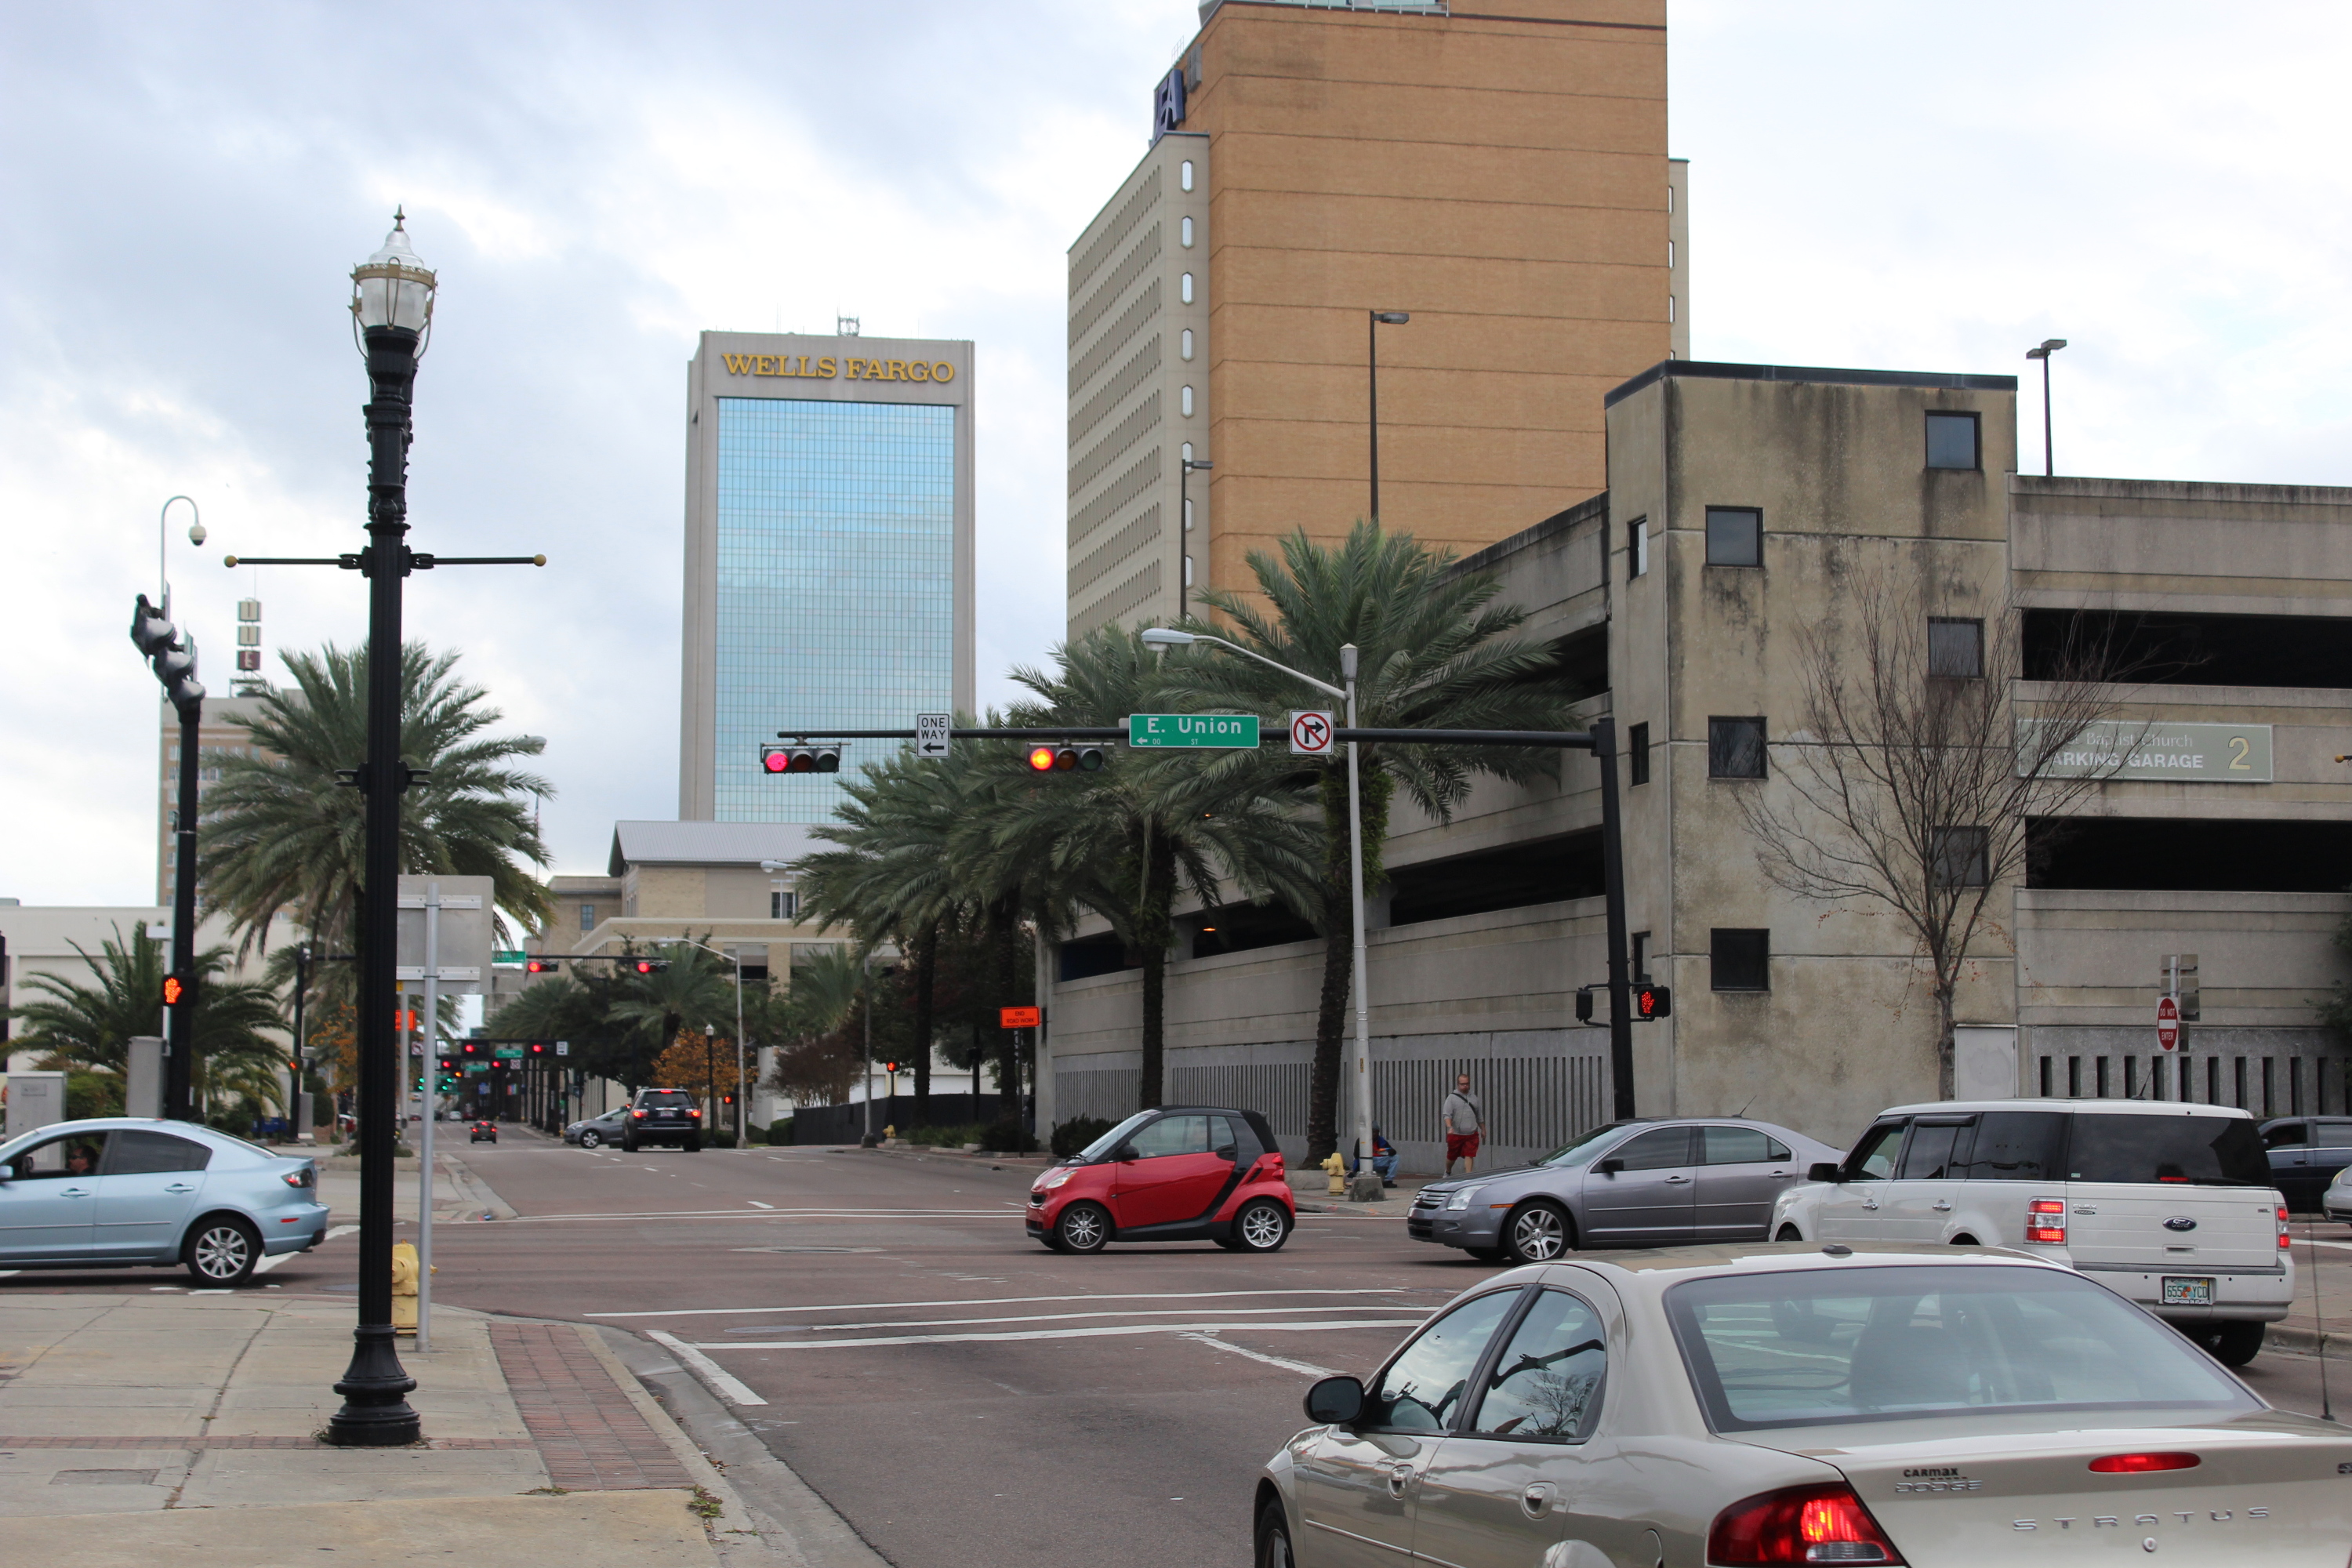 background image, Florida intersection with Smart Car and Wells Fargo building in the background